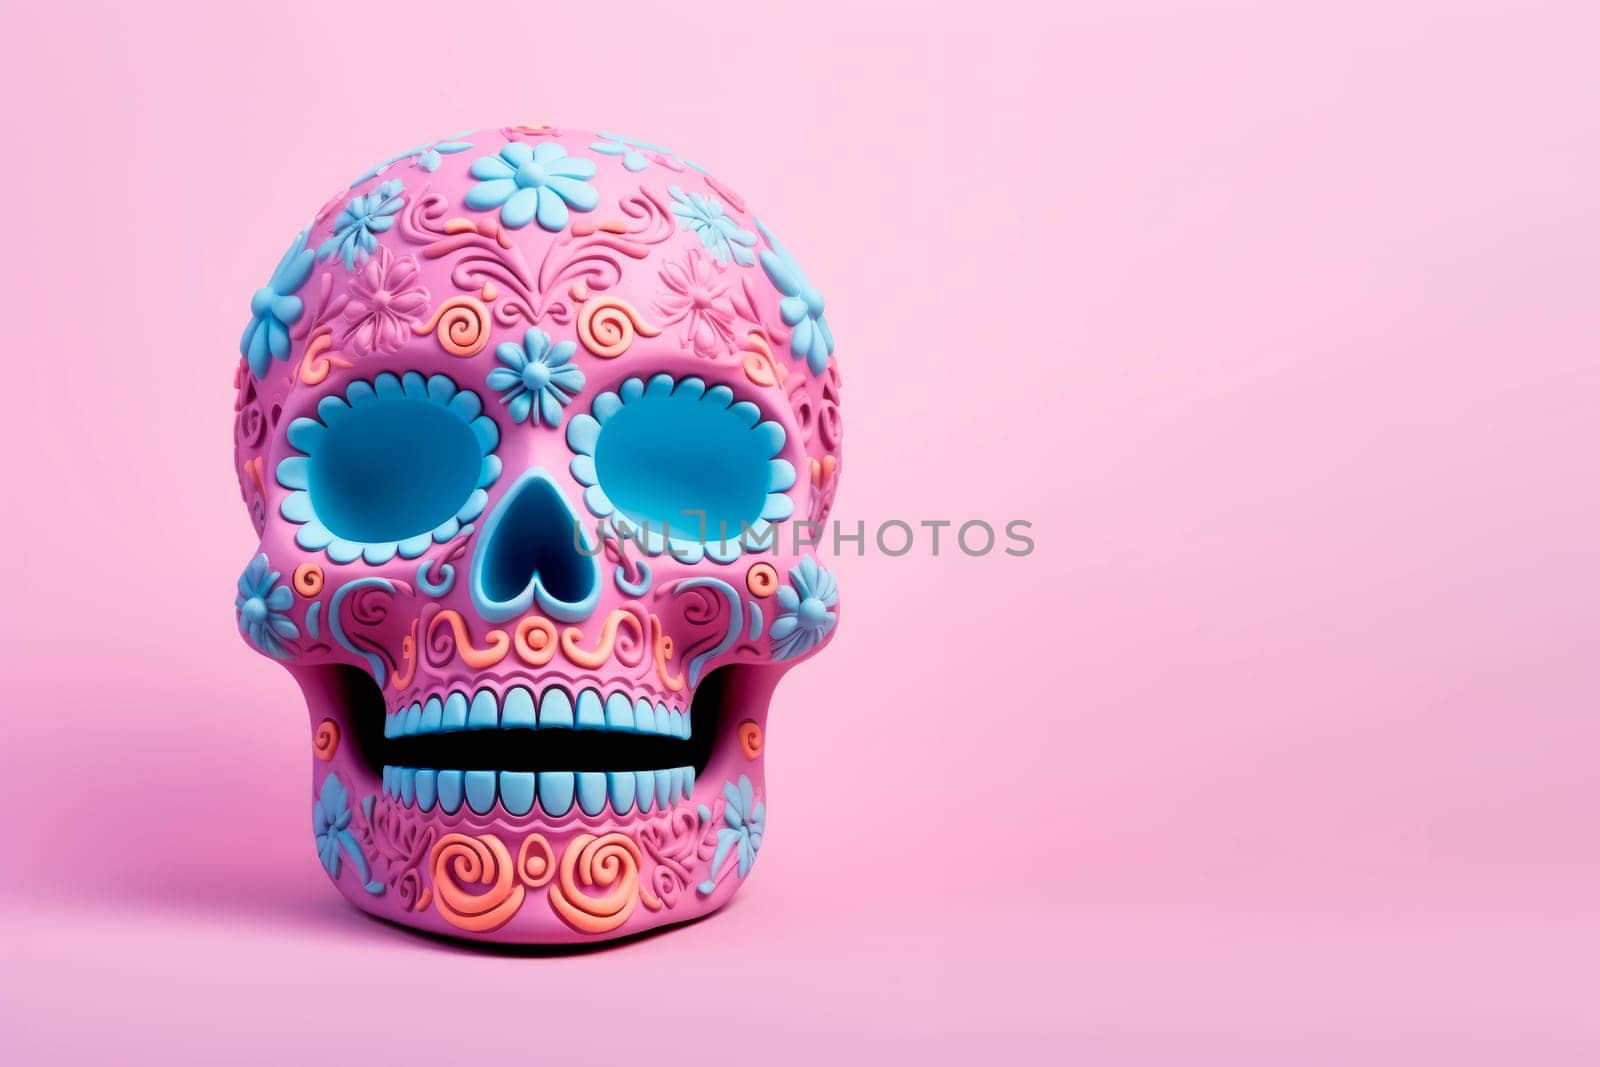 Bright creative skull sugar loaf is made in Mexican traditions. High quality photo